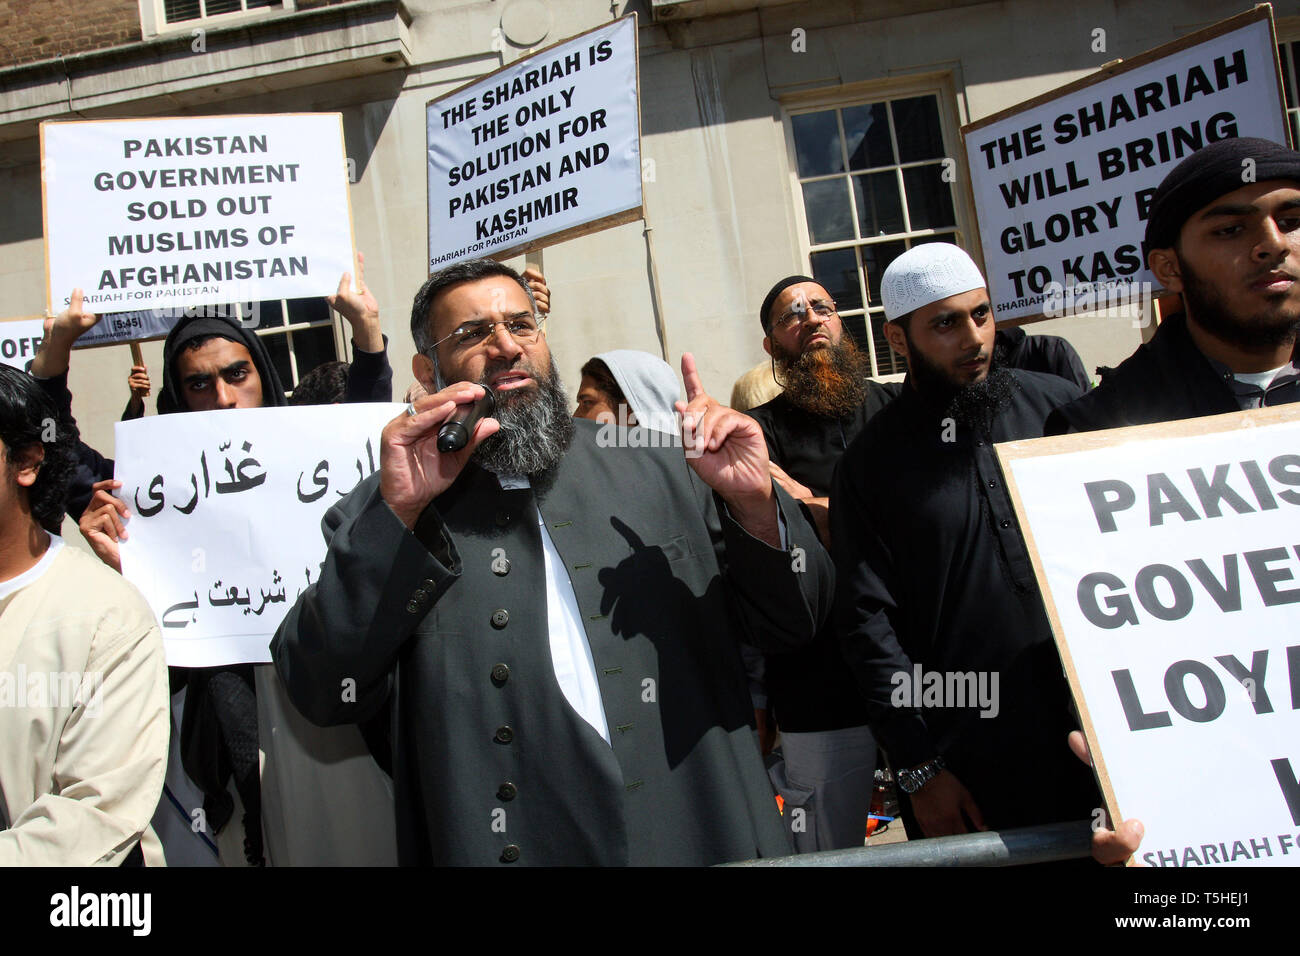 Anjem Choudary speaking at a Shariah for Pakistan protest outside the Pakistani Embassy in Knightsbridge. London. 5 August 2010. Stock Photo